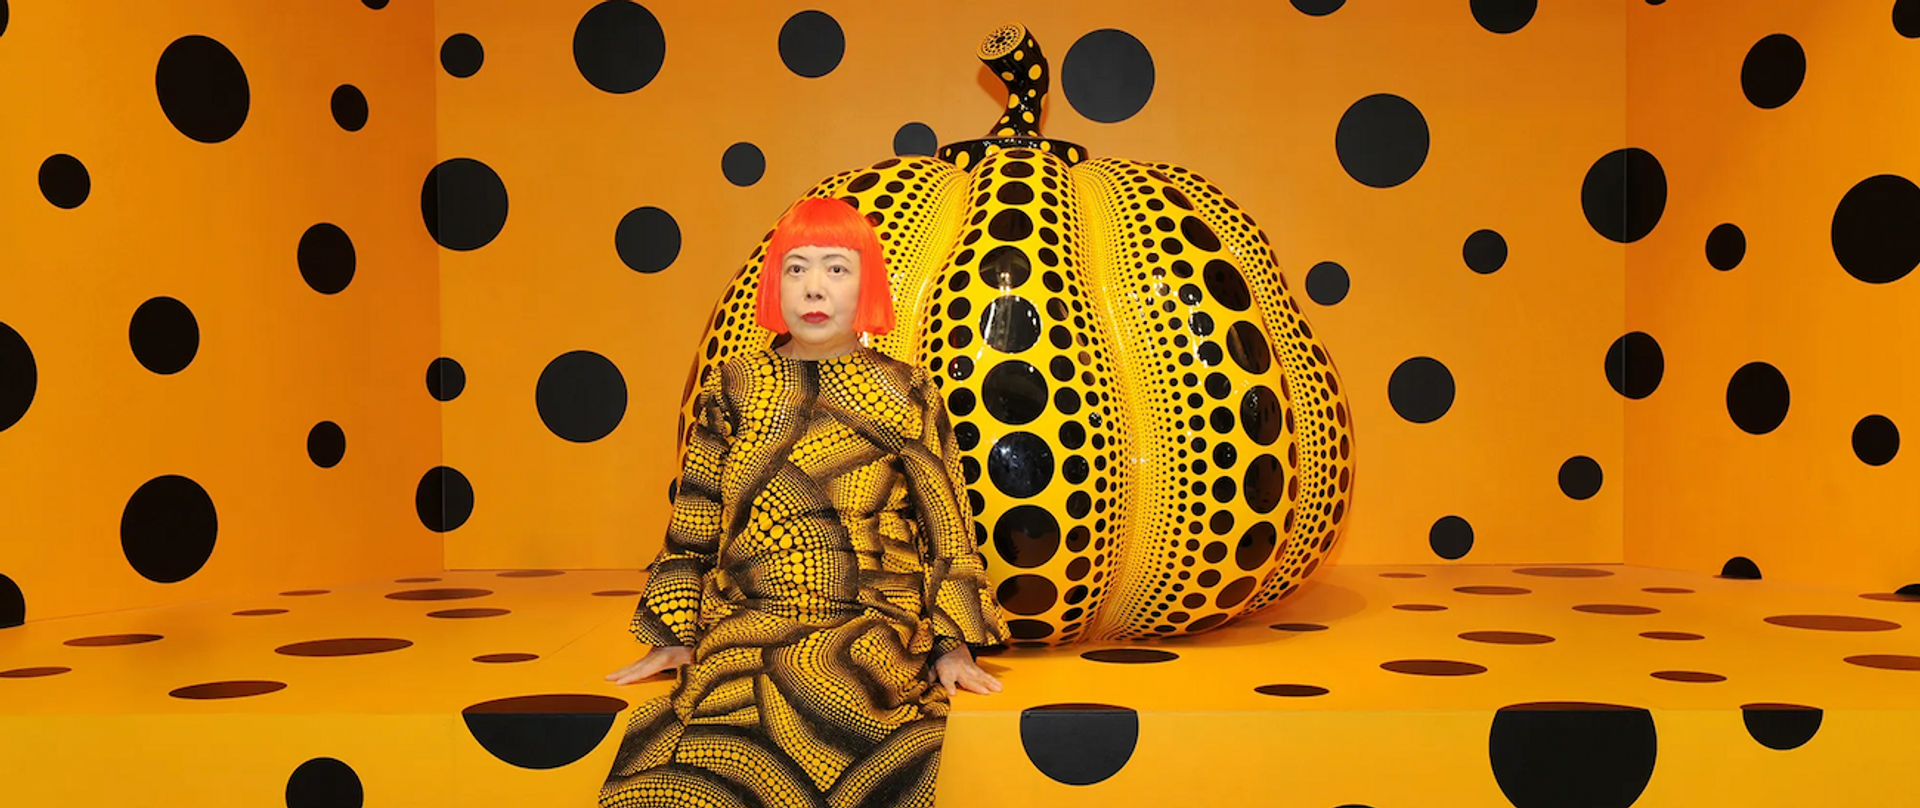 Yayoi Kusama sat in front of a human sized yellow and black pumpkin in an orange room covered in black dots